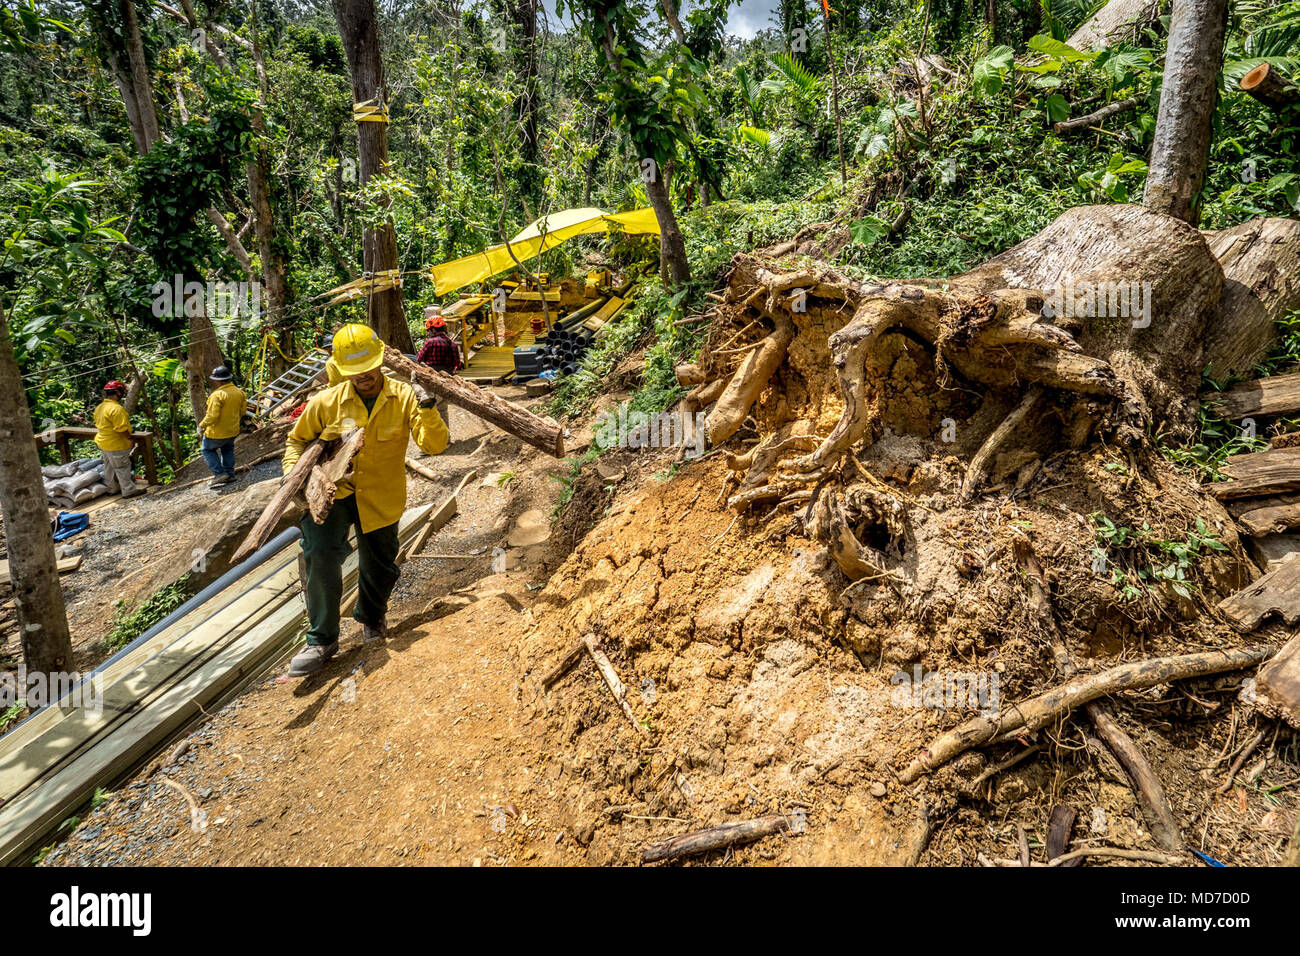 Six months after Hurricane Maria, only a small portion of El Yunque National Forest, Puerto Rico, is available to the public. Elsewhere, in the park contractors are working to get the forest ready for visitors throughout. Before a zipline and boardwalk was installed, workers has to hand-carry supplies up and down the steep forest hills to repair a water system that was damaged. Stock Photo